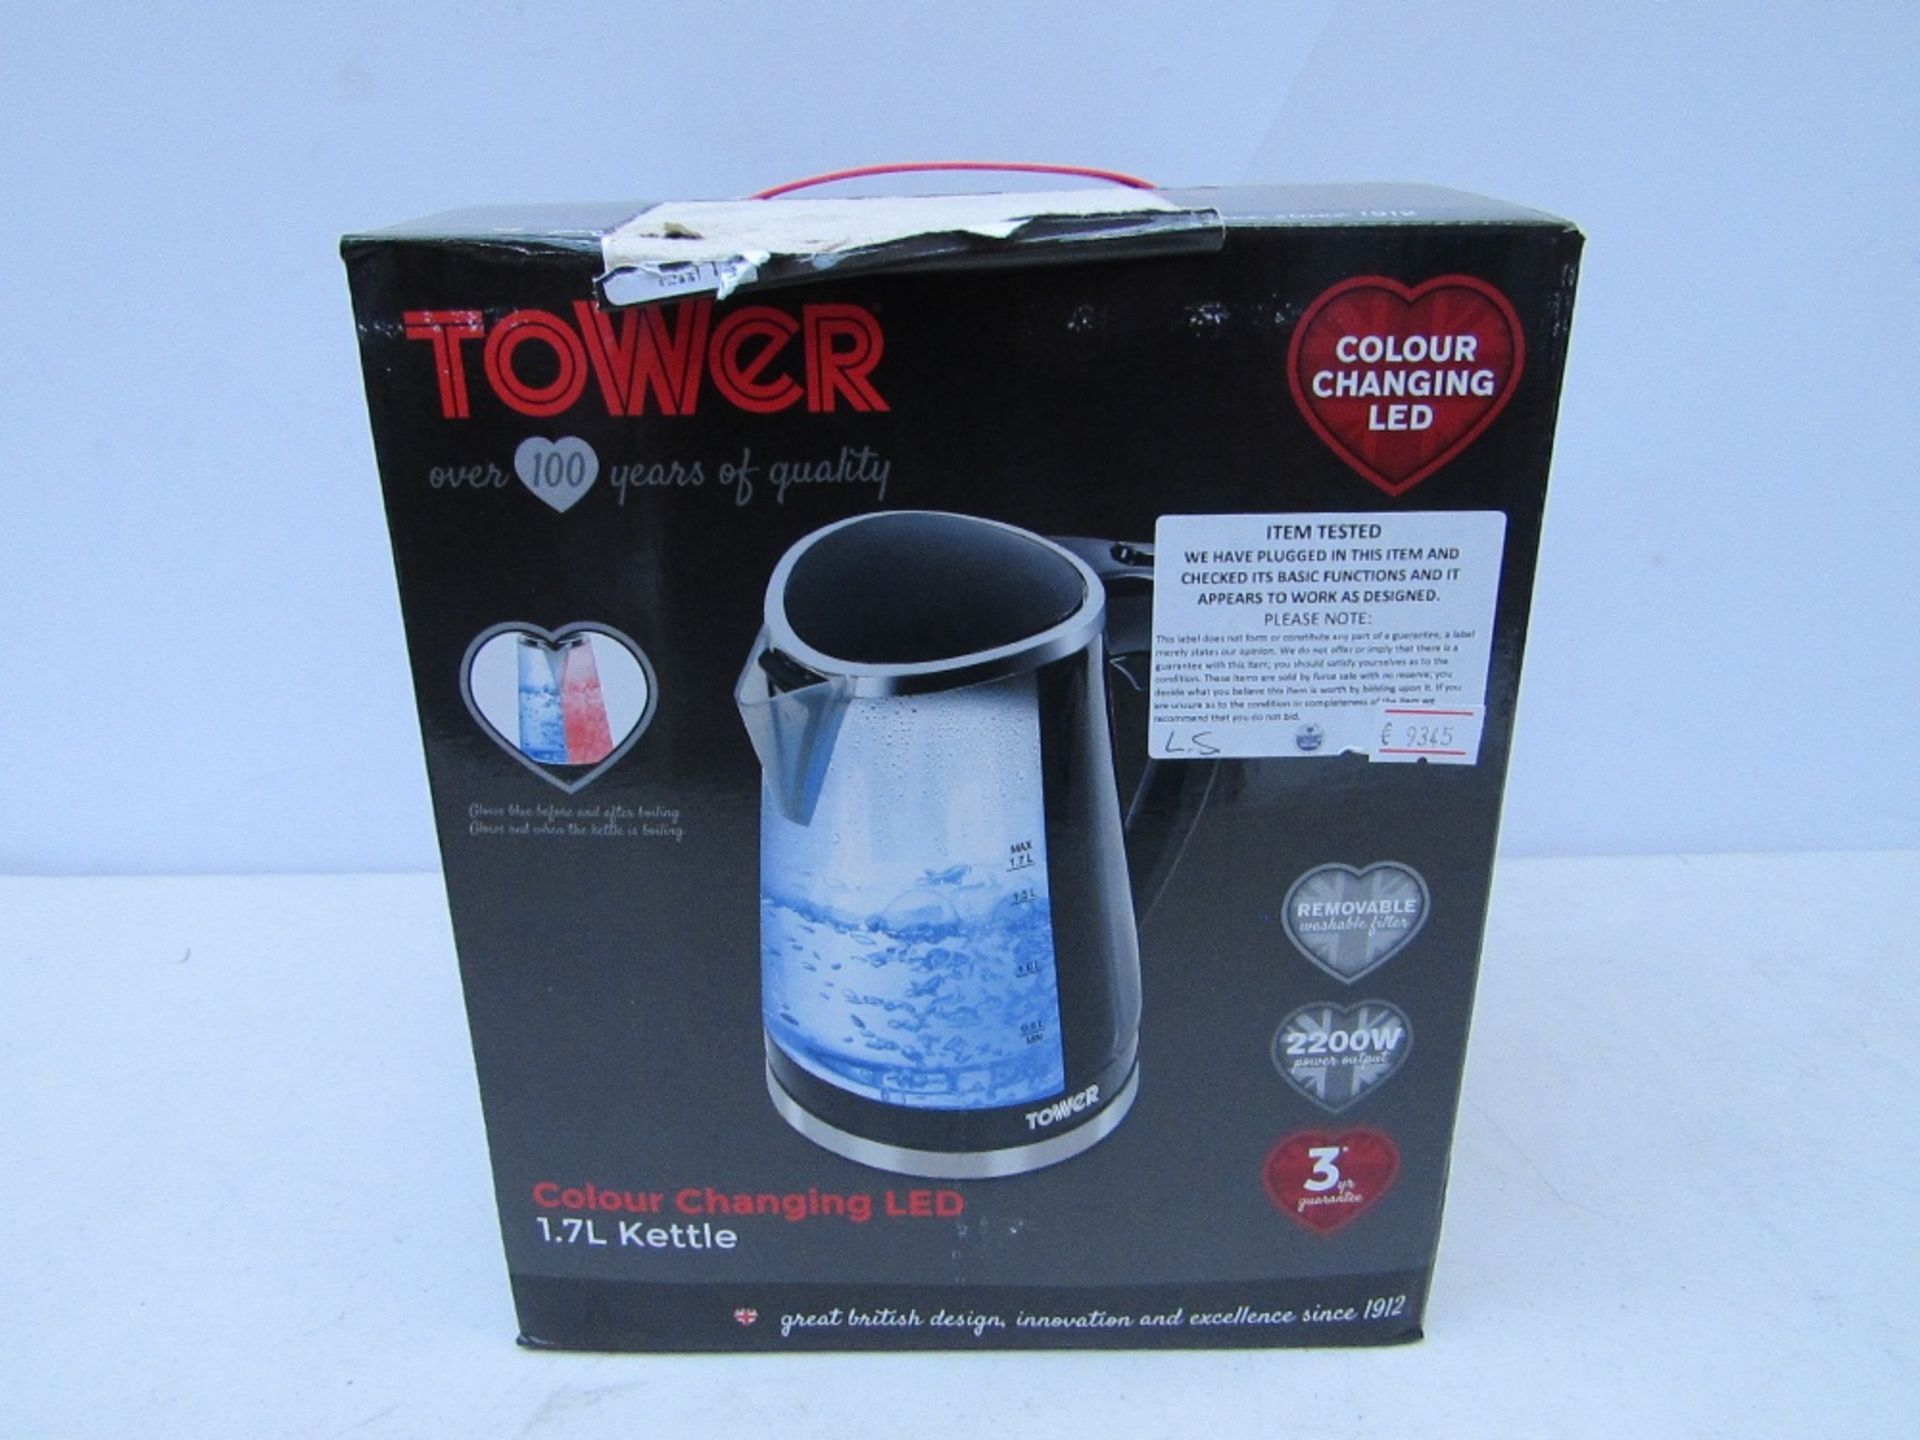 Tower colour changing LED 1.7L kettle. Tested working & boxed.